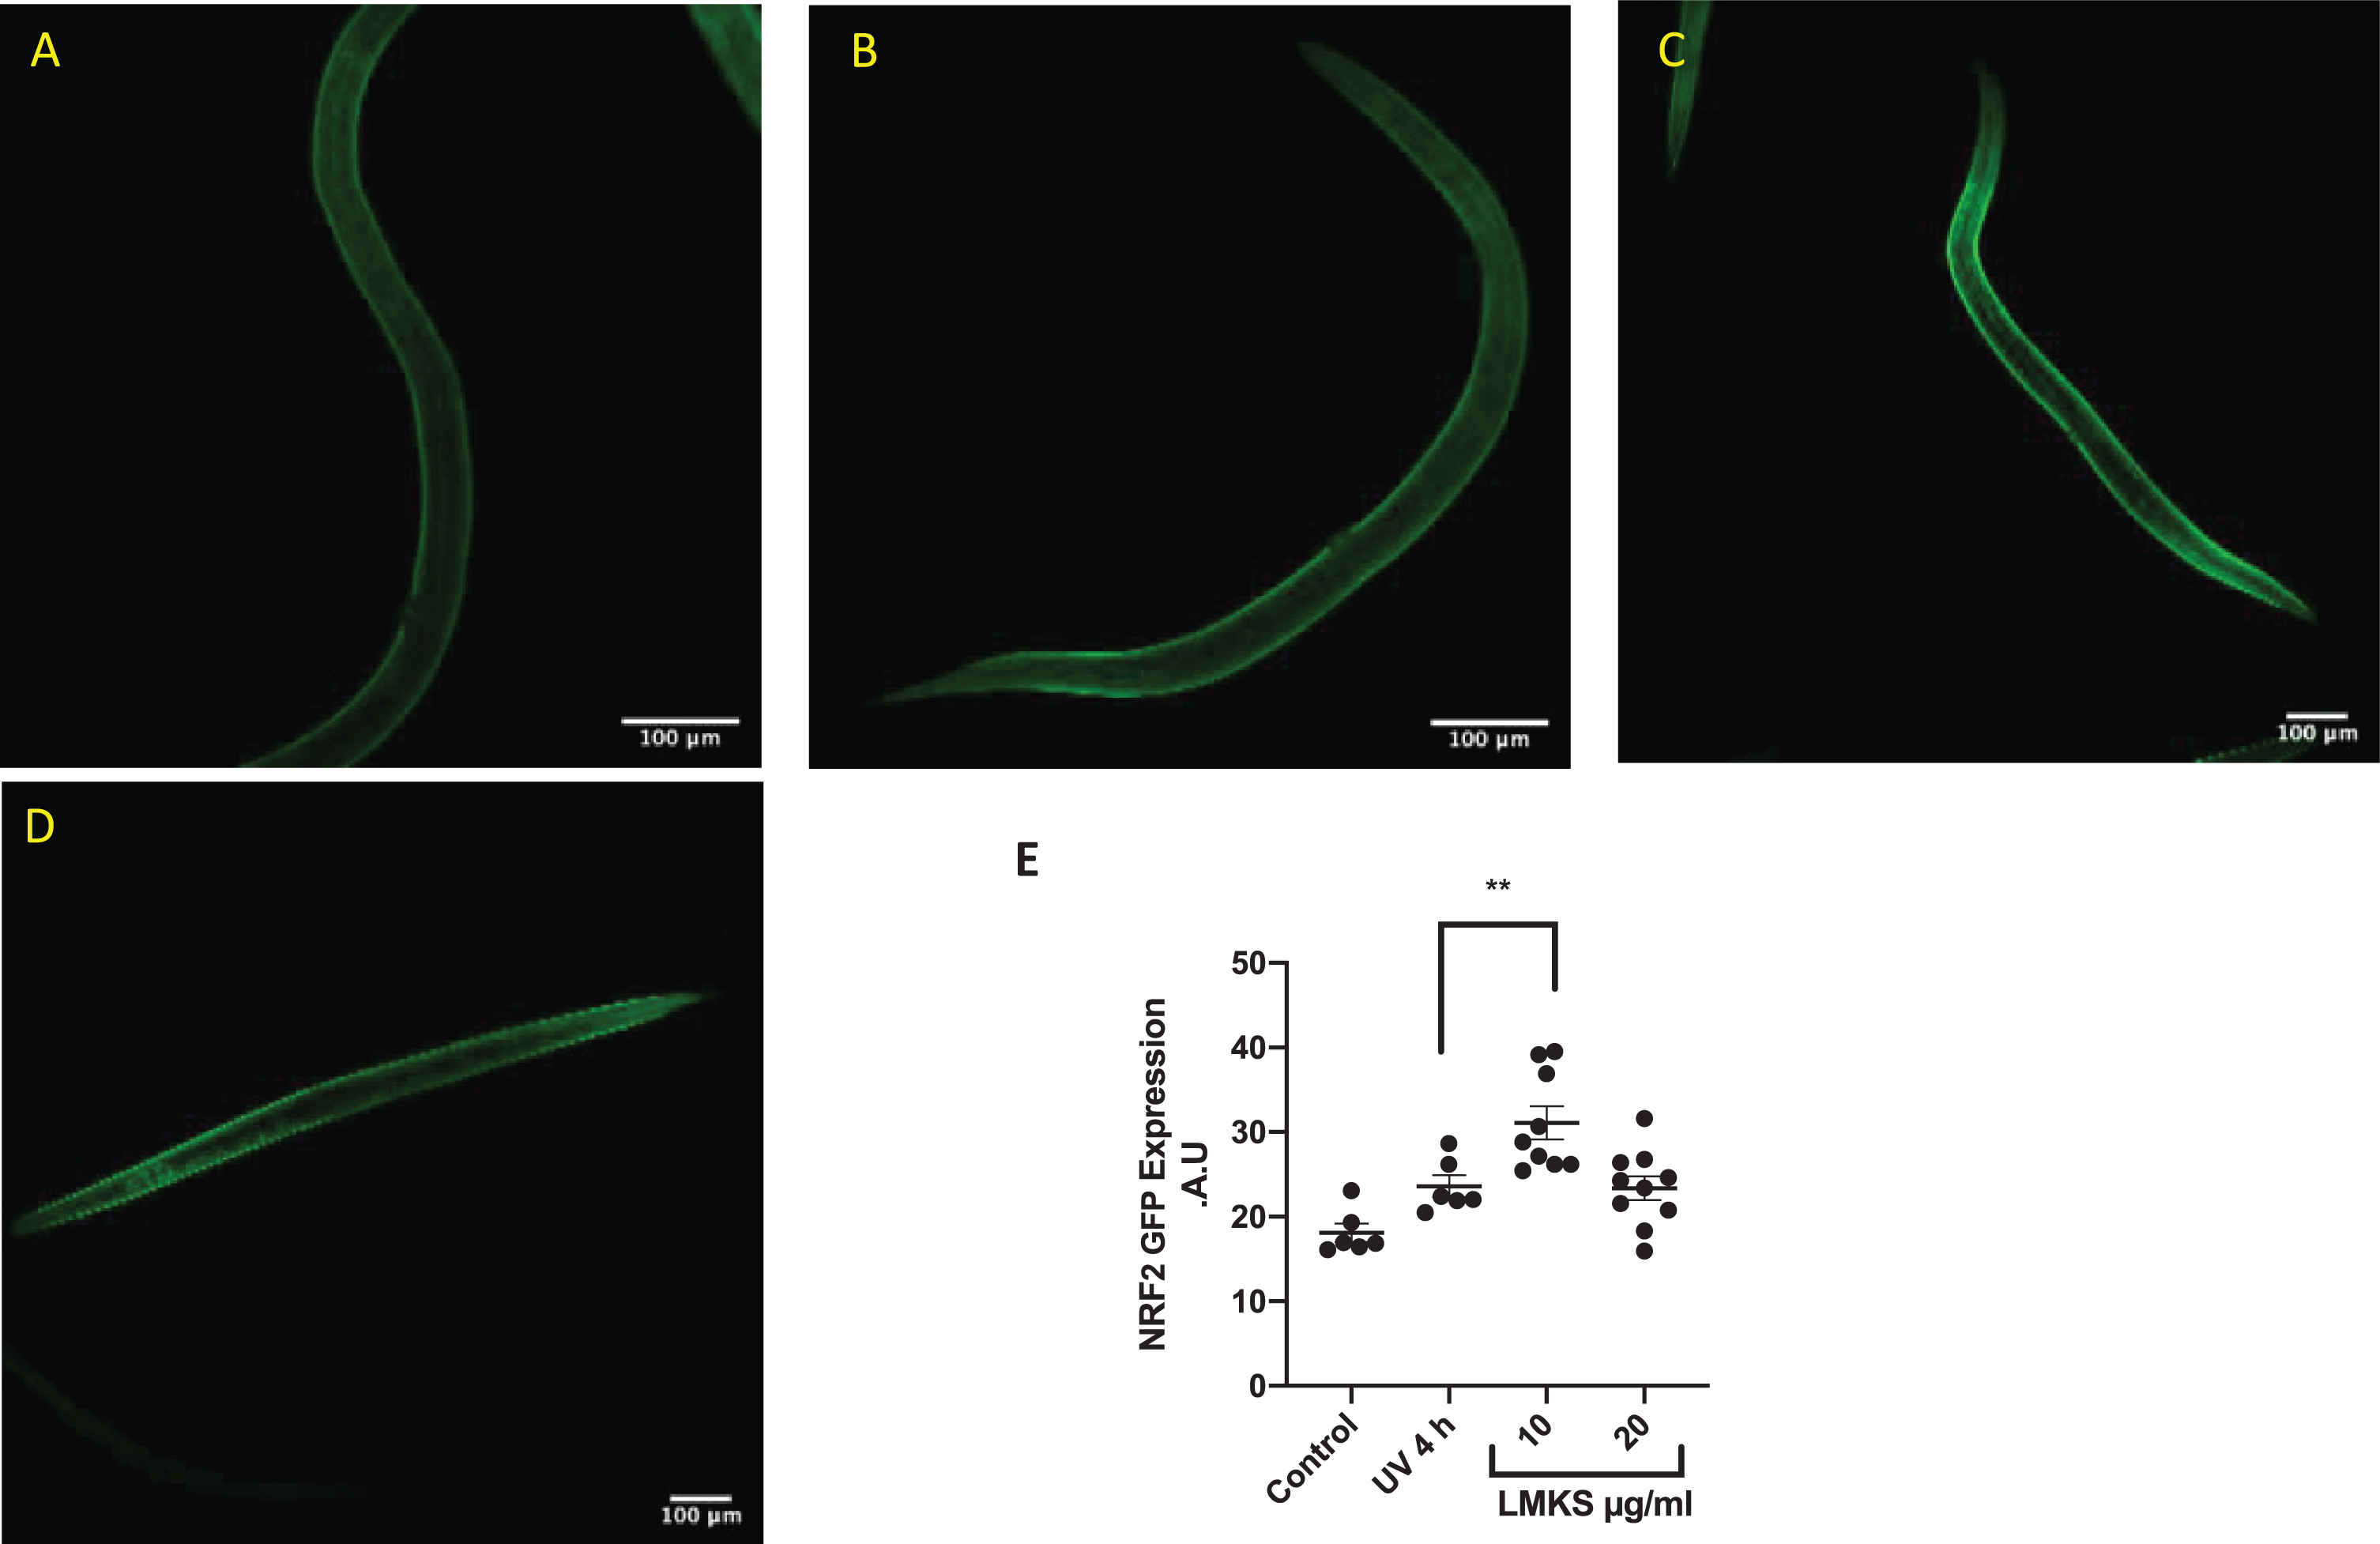 SKN-1-GFP expressing C.elegans exposed to UV-A for 4 hours. A) Control. NRF2-GFP expressing worms with no UV-A exposure. B) NRF2-GFP worms exposed to 4 hours of UV-A. C) NRF2-GFP worms treated with 10 μg/ml LMKS after exposure to 4 hours of UV-A. D) NRF2-GFP worms treated with 20 μg/ml LMKS after exposure to 4 hours of UV-A. E) Quantification of fluorescence of the individual worms. Significant difference compared to UV 4h using ANOVA followed by Dunnett’s post hoc multiple comparisons test **P = 0.0095.